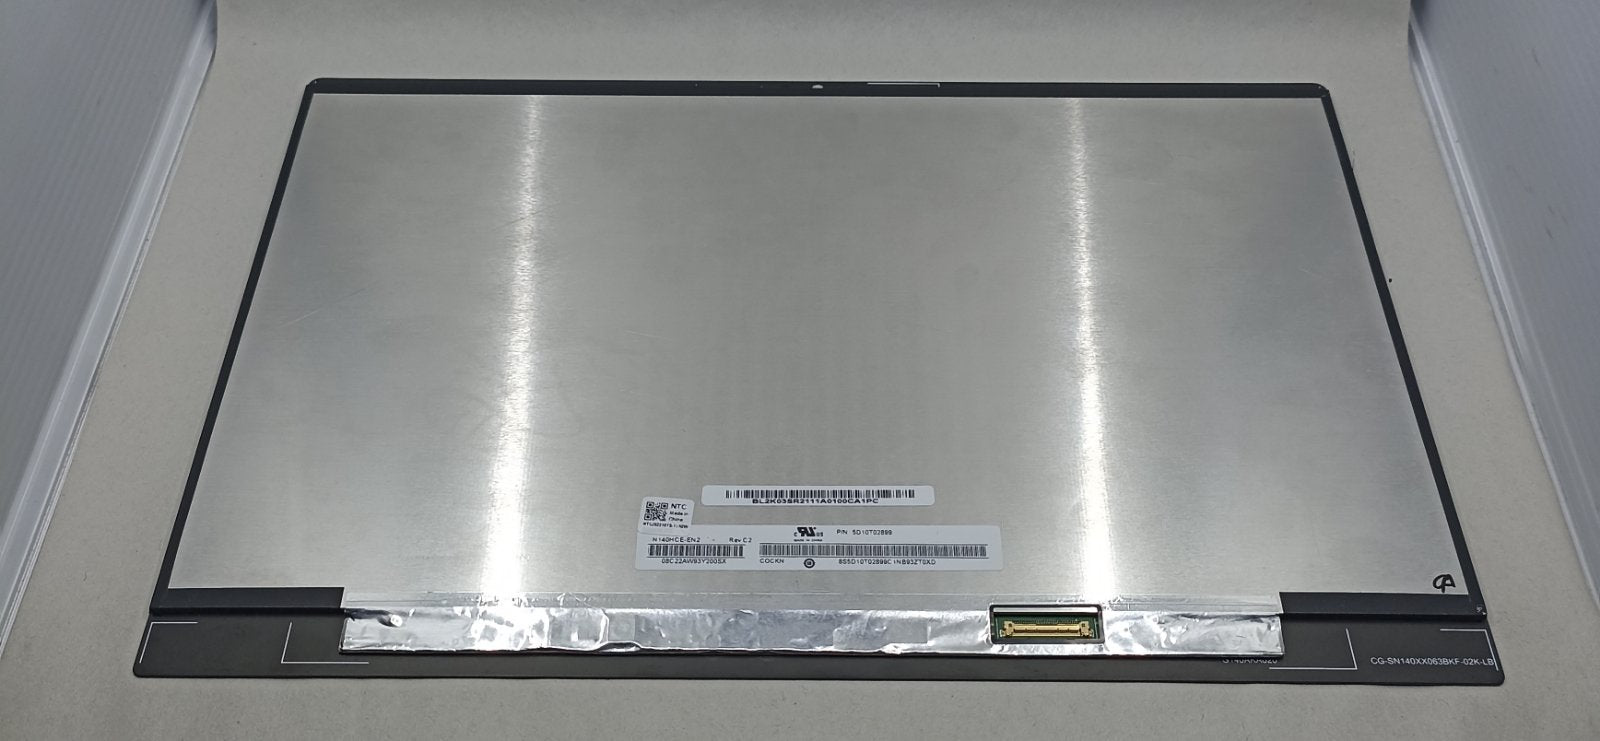 Replacement LCD For Lenovo S540-14IML WL